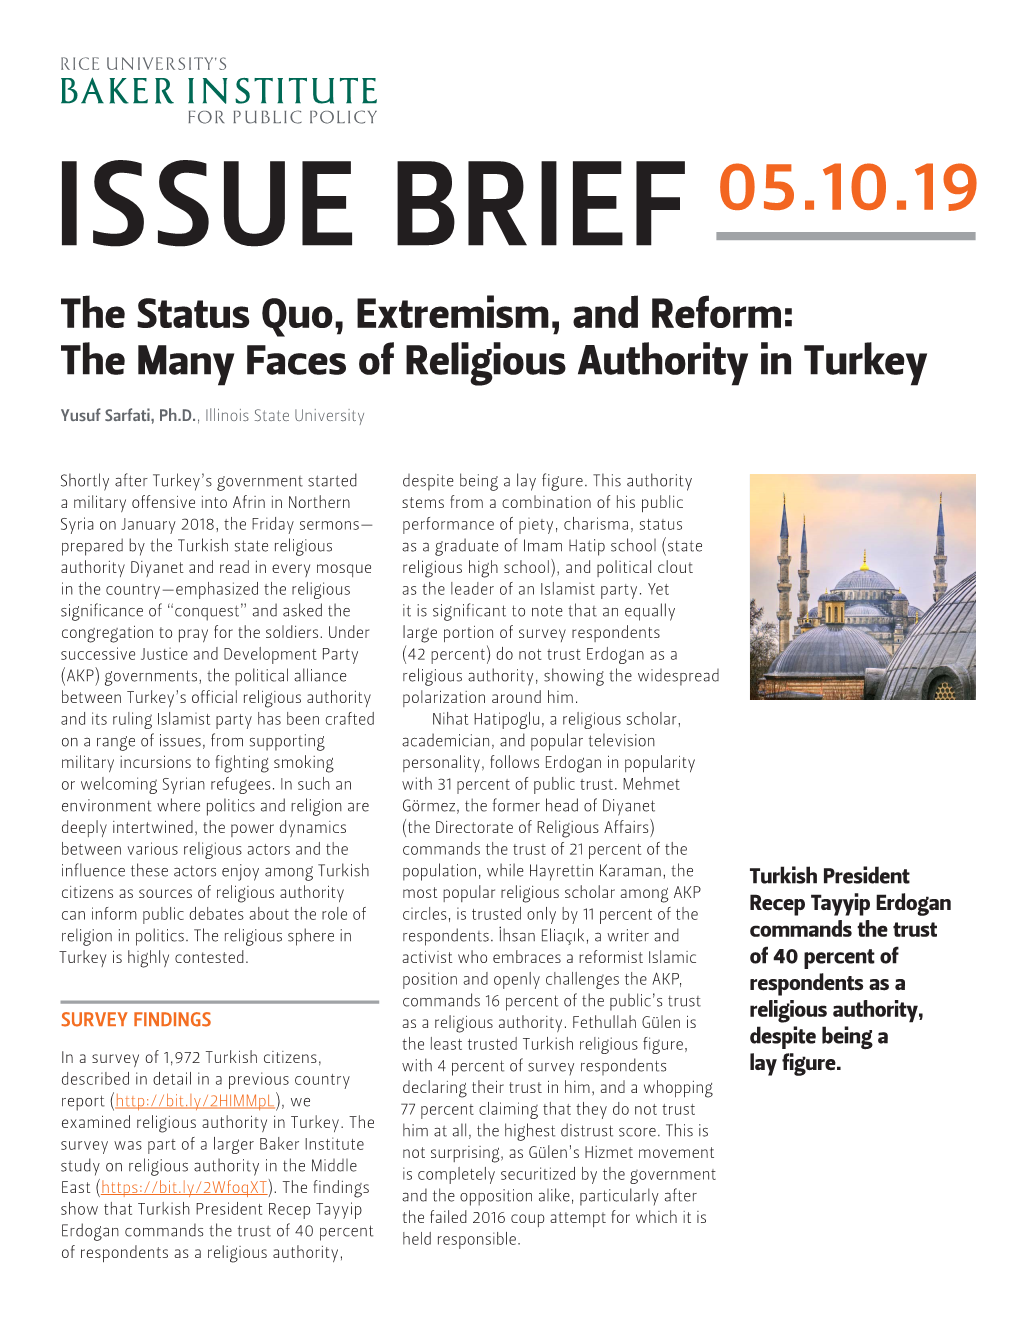 The Many Faces of Religious Authority in Turkey